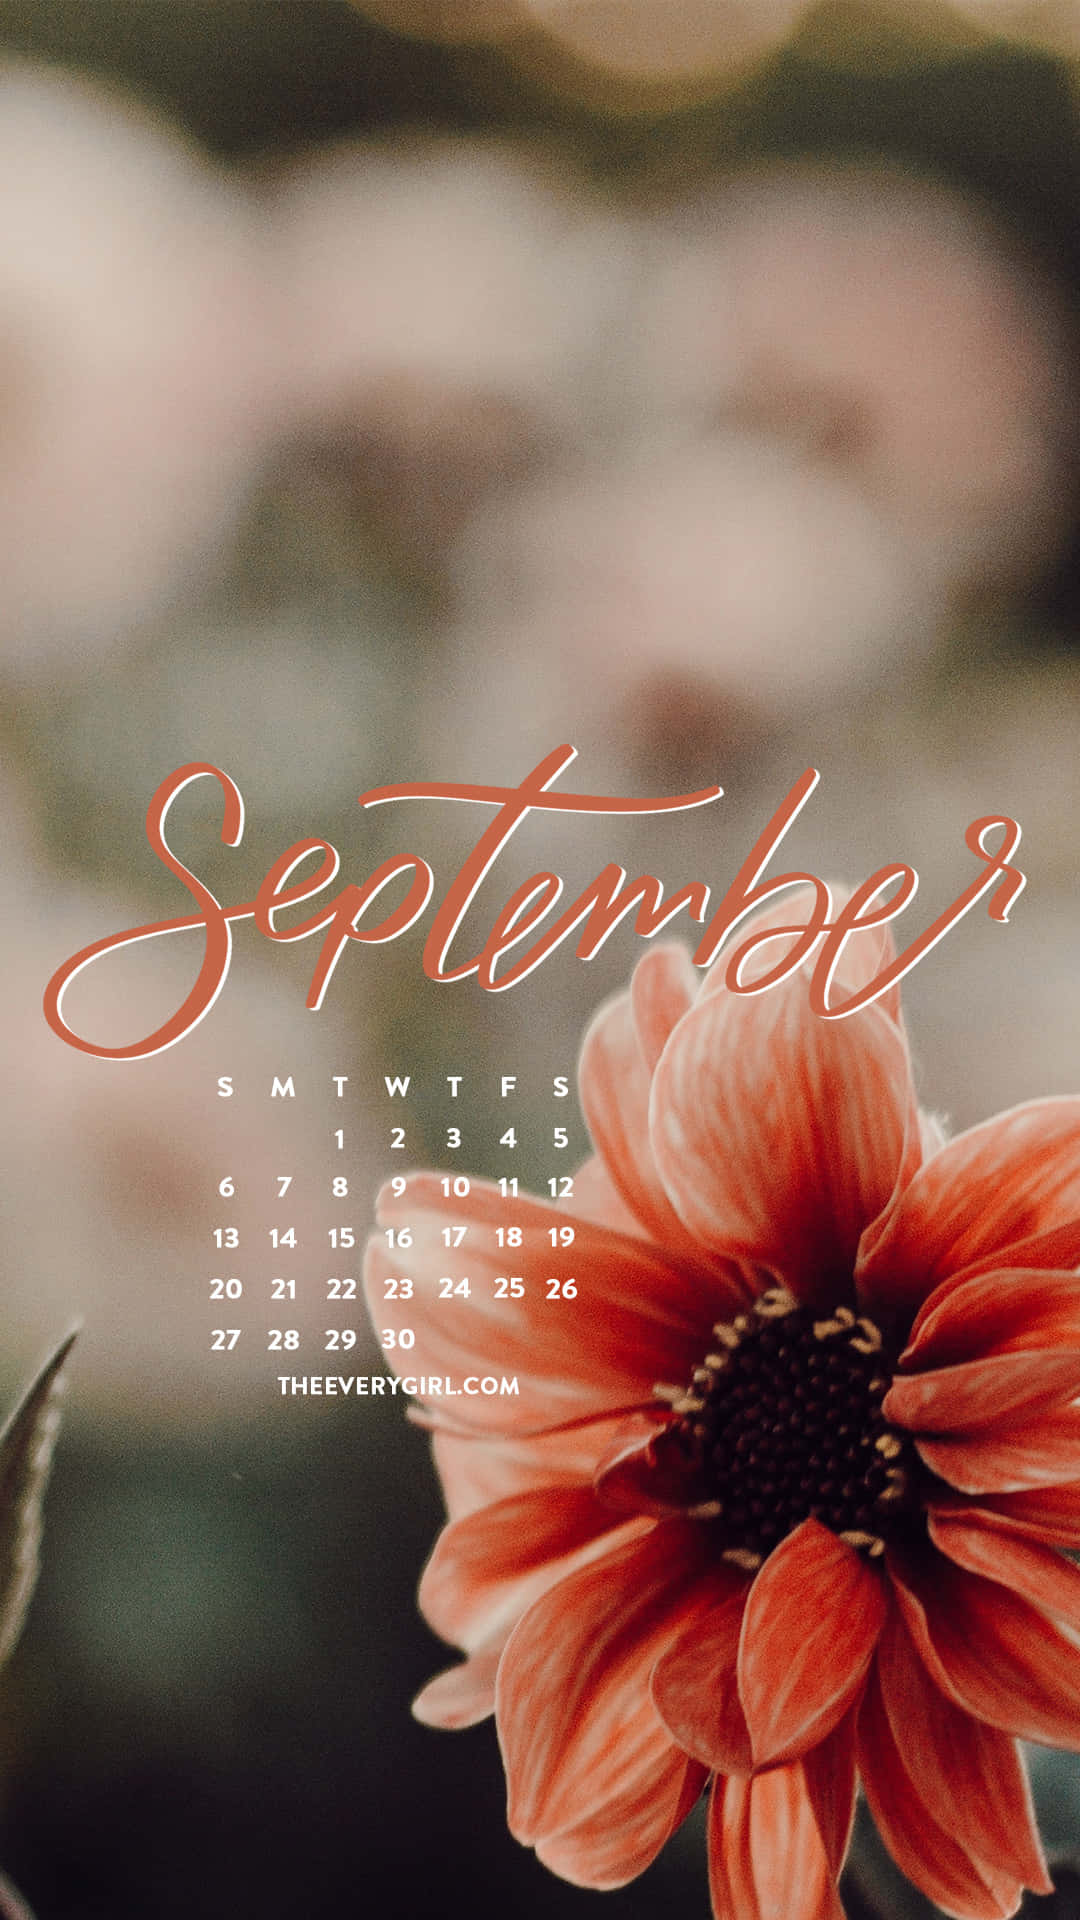 Welcome to September!